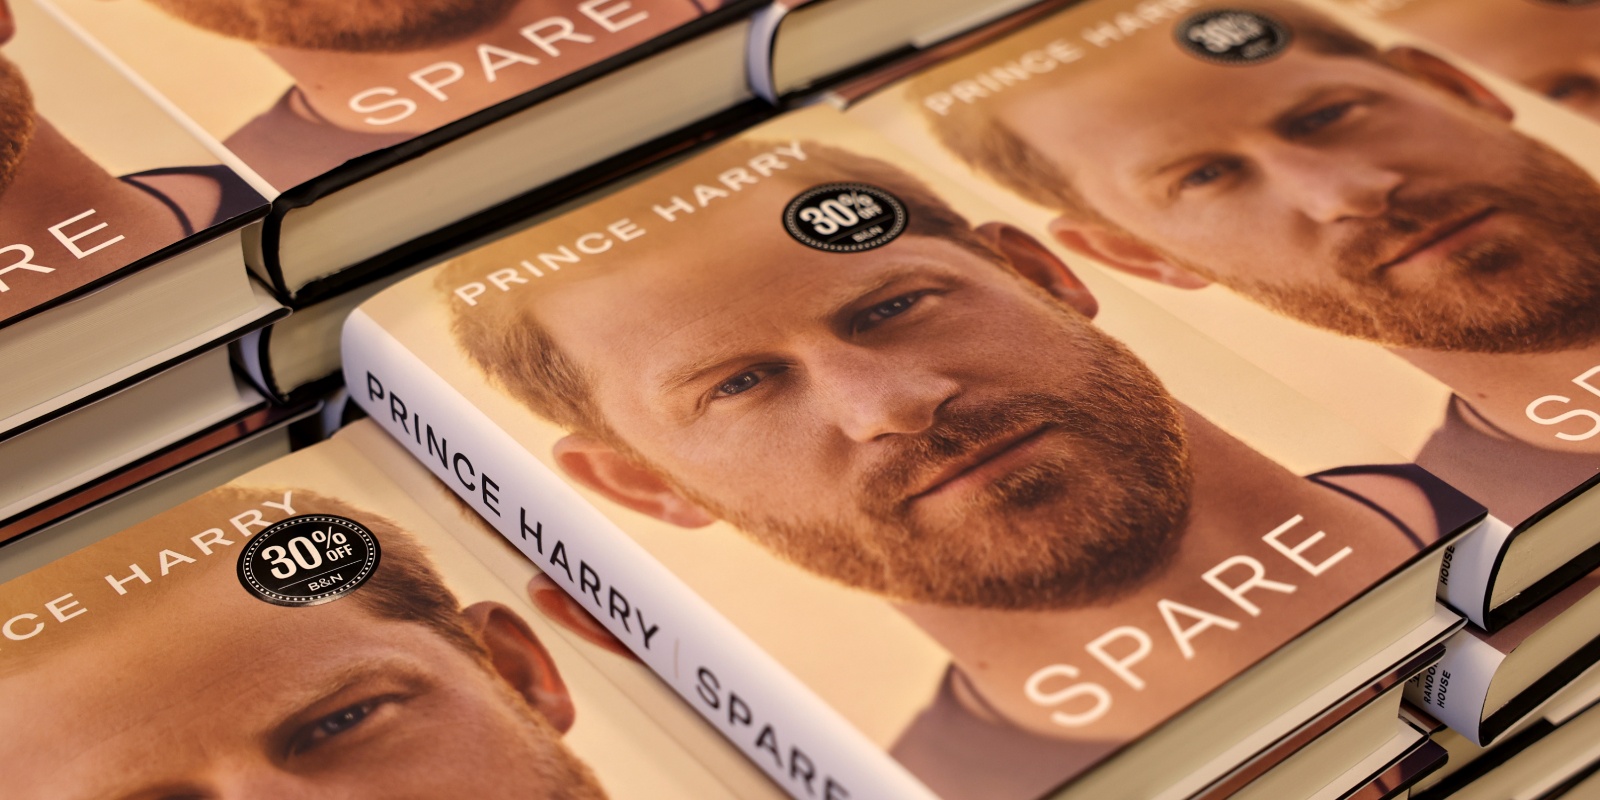 Prince Harry's memoir 'Spare' in bookstores.